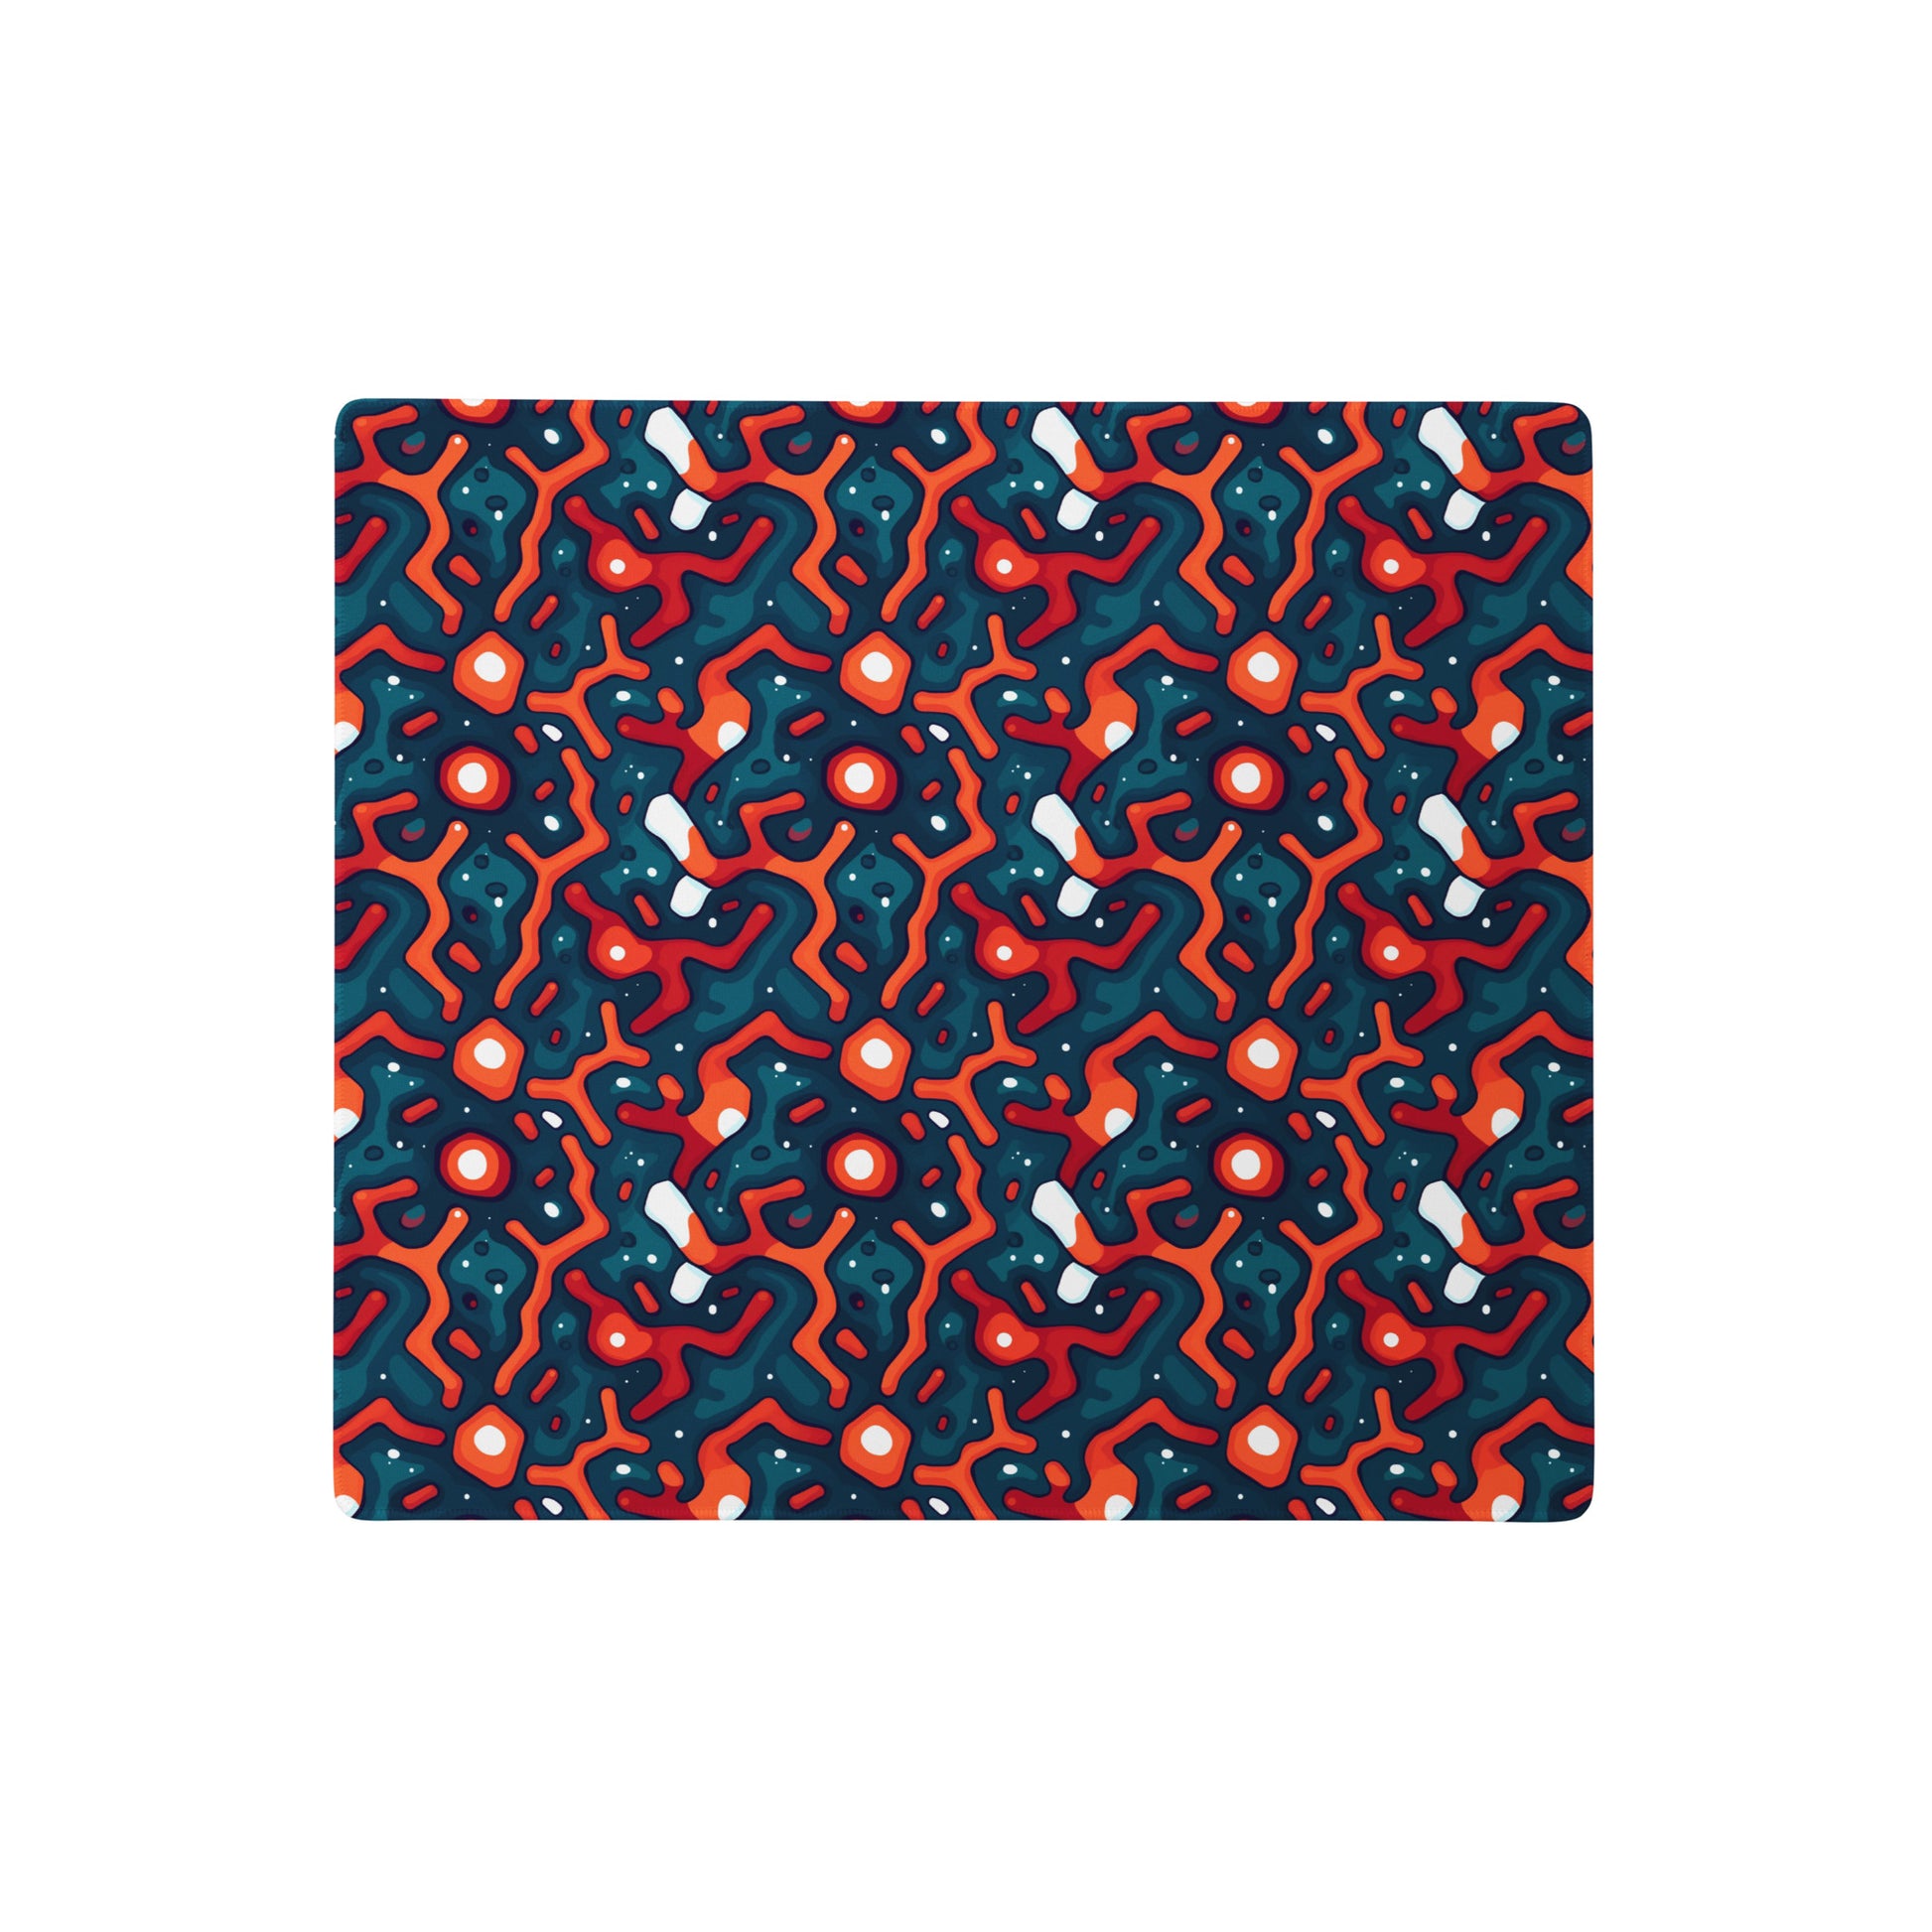 A 18" x 16" desk pad with a blue and orange crack pattern.